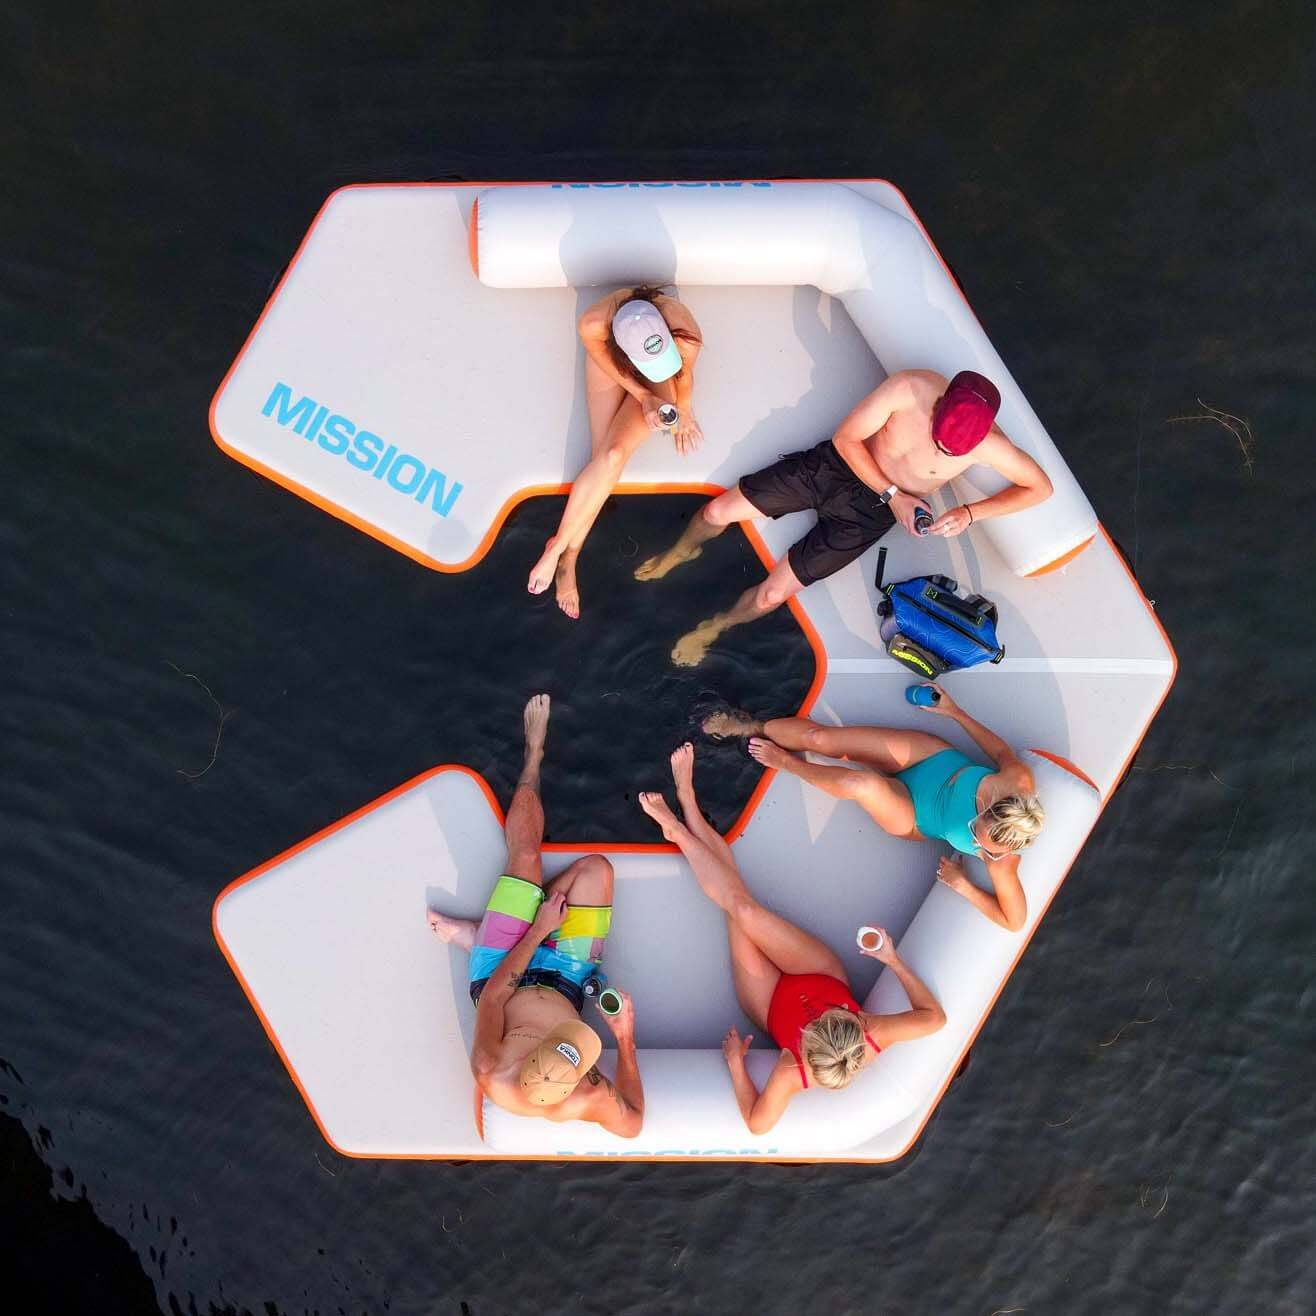 A group of people enjoying the MISSION Reef Hex 82 Mat by sitting on an inflatable floating lounger.